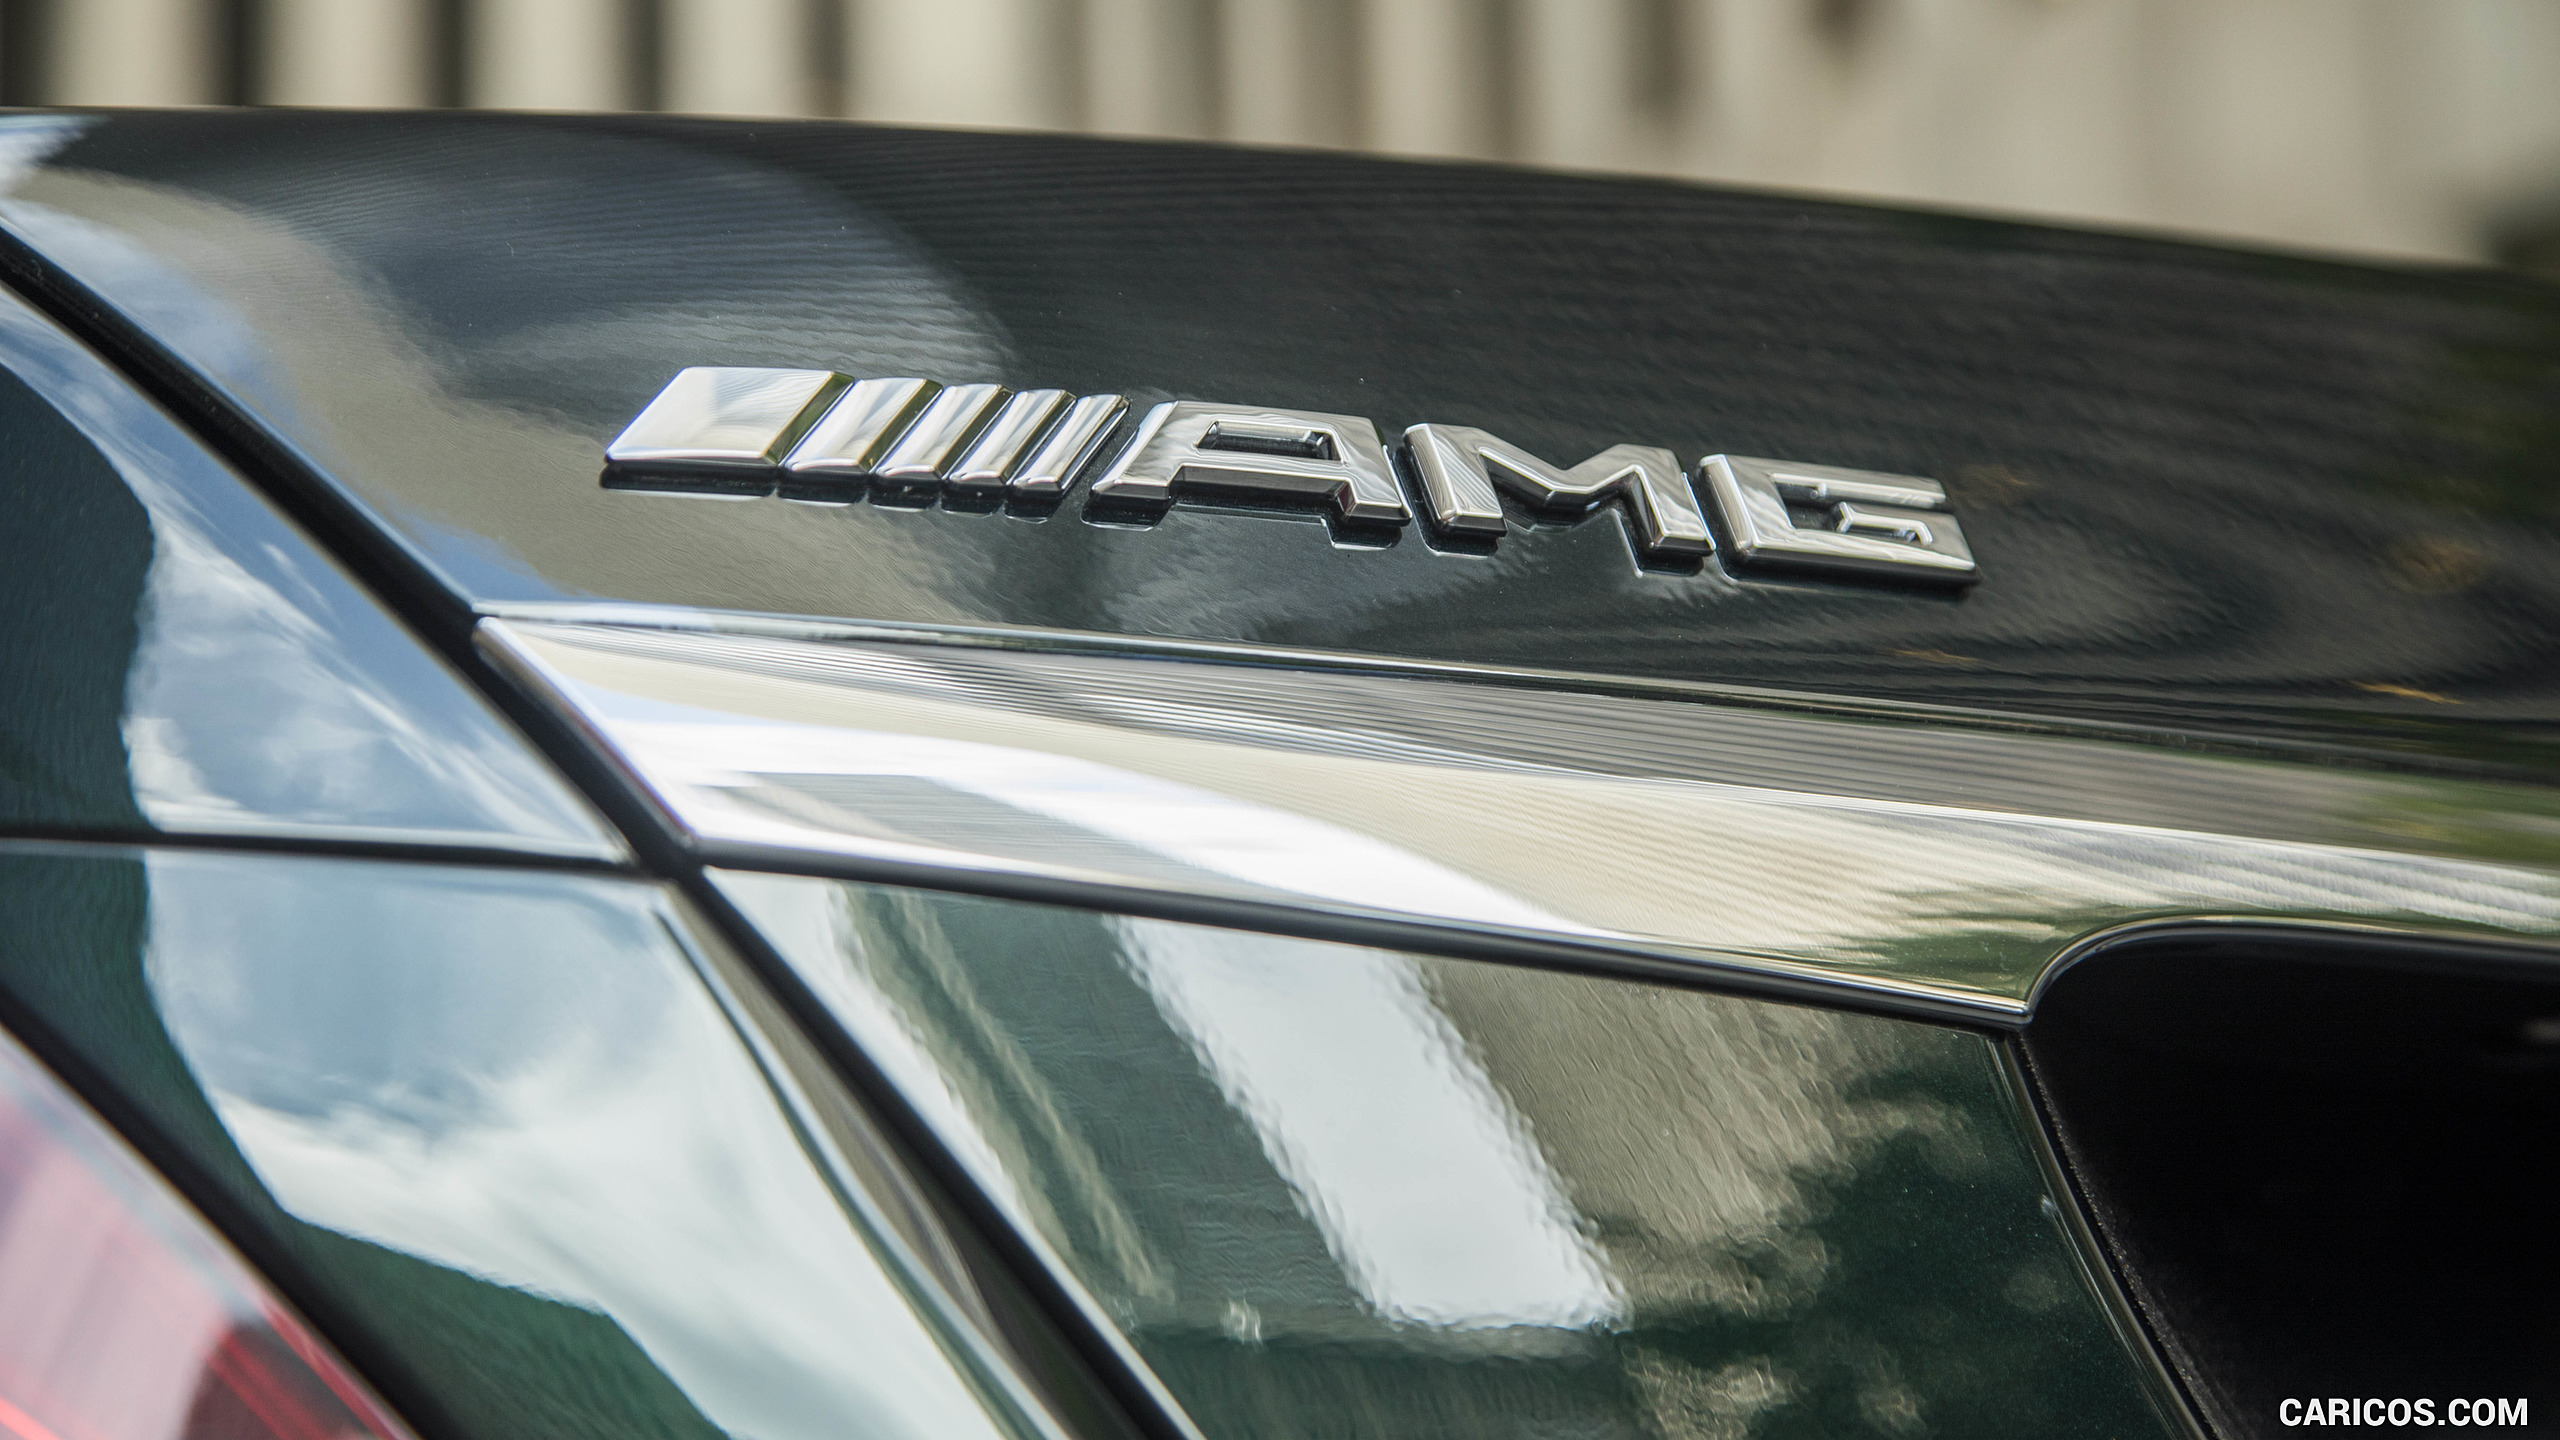 2018 Mercedes-AMG S65 - Badge, #39 of 41